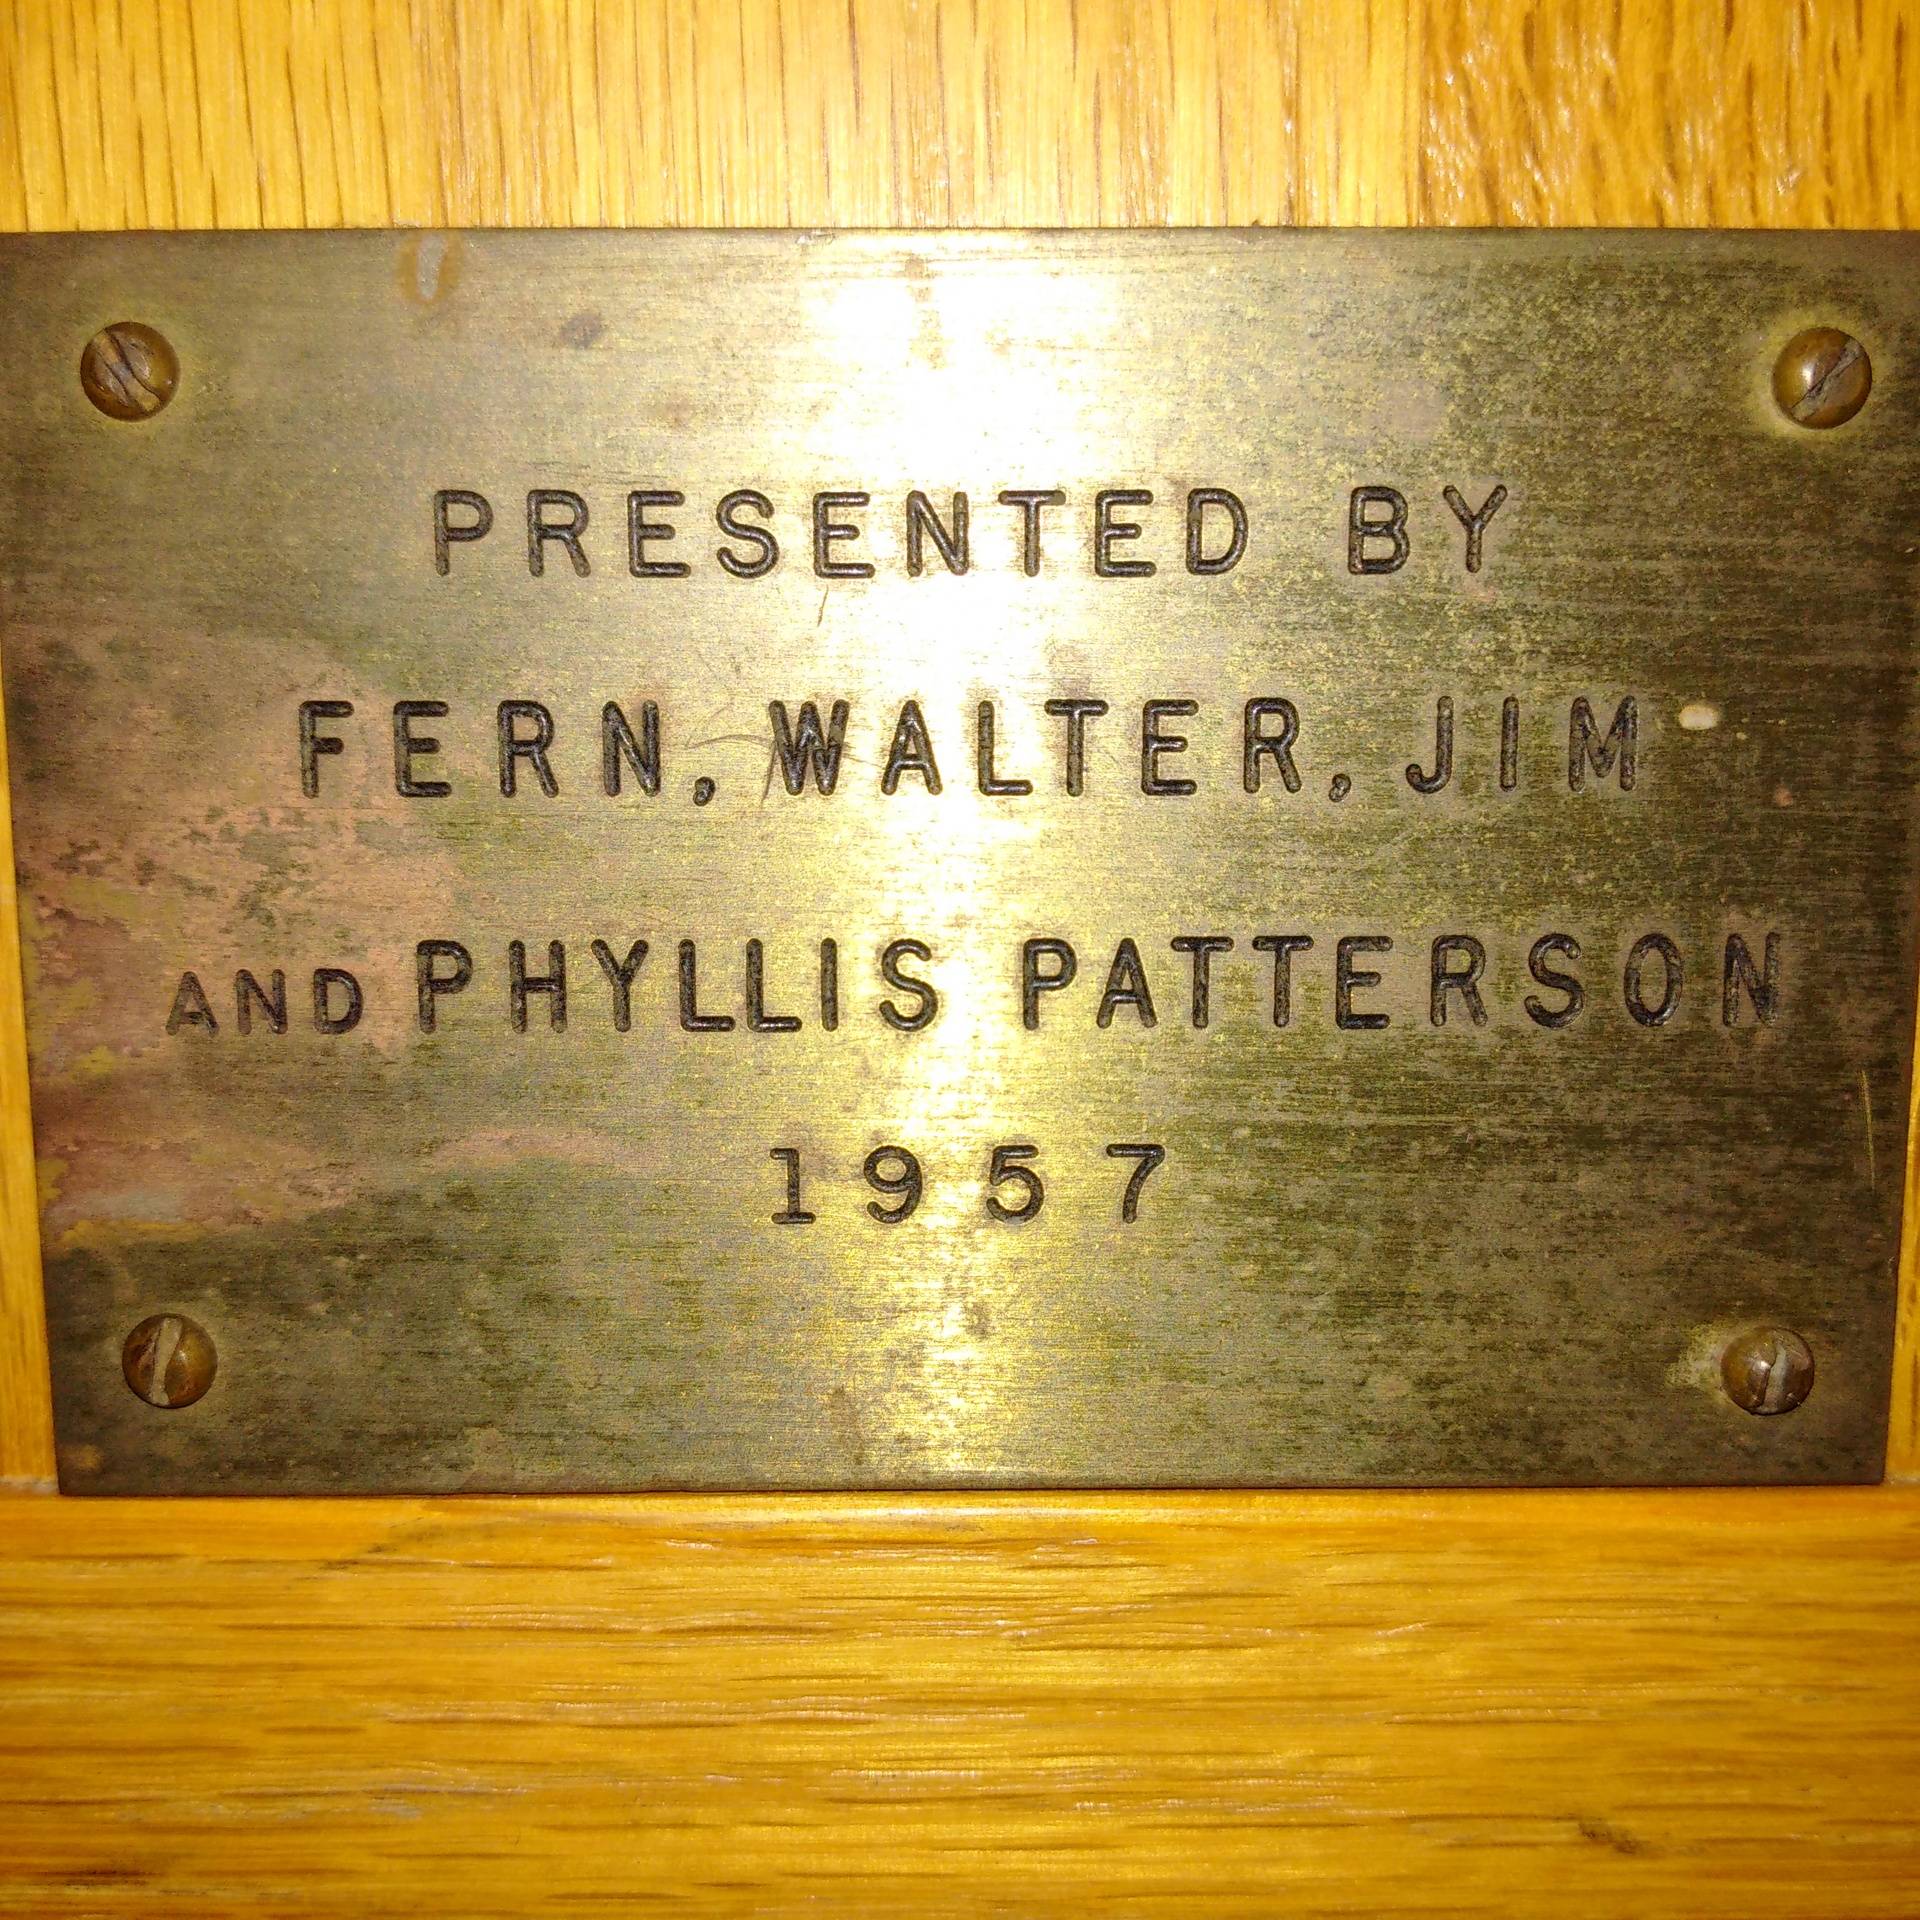 Fern, Walter and Phyllis Patterson 1957